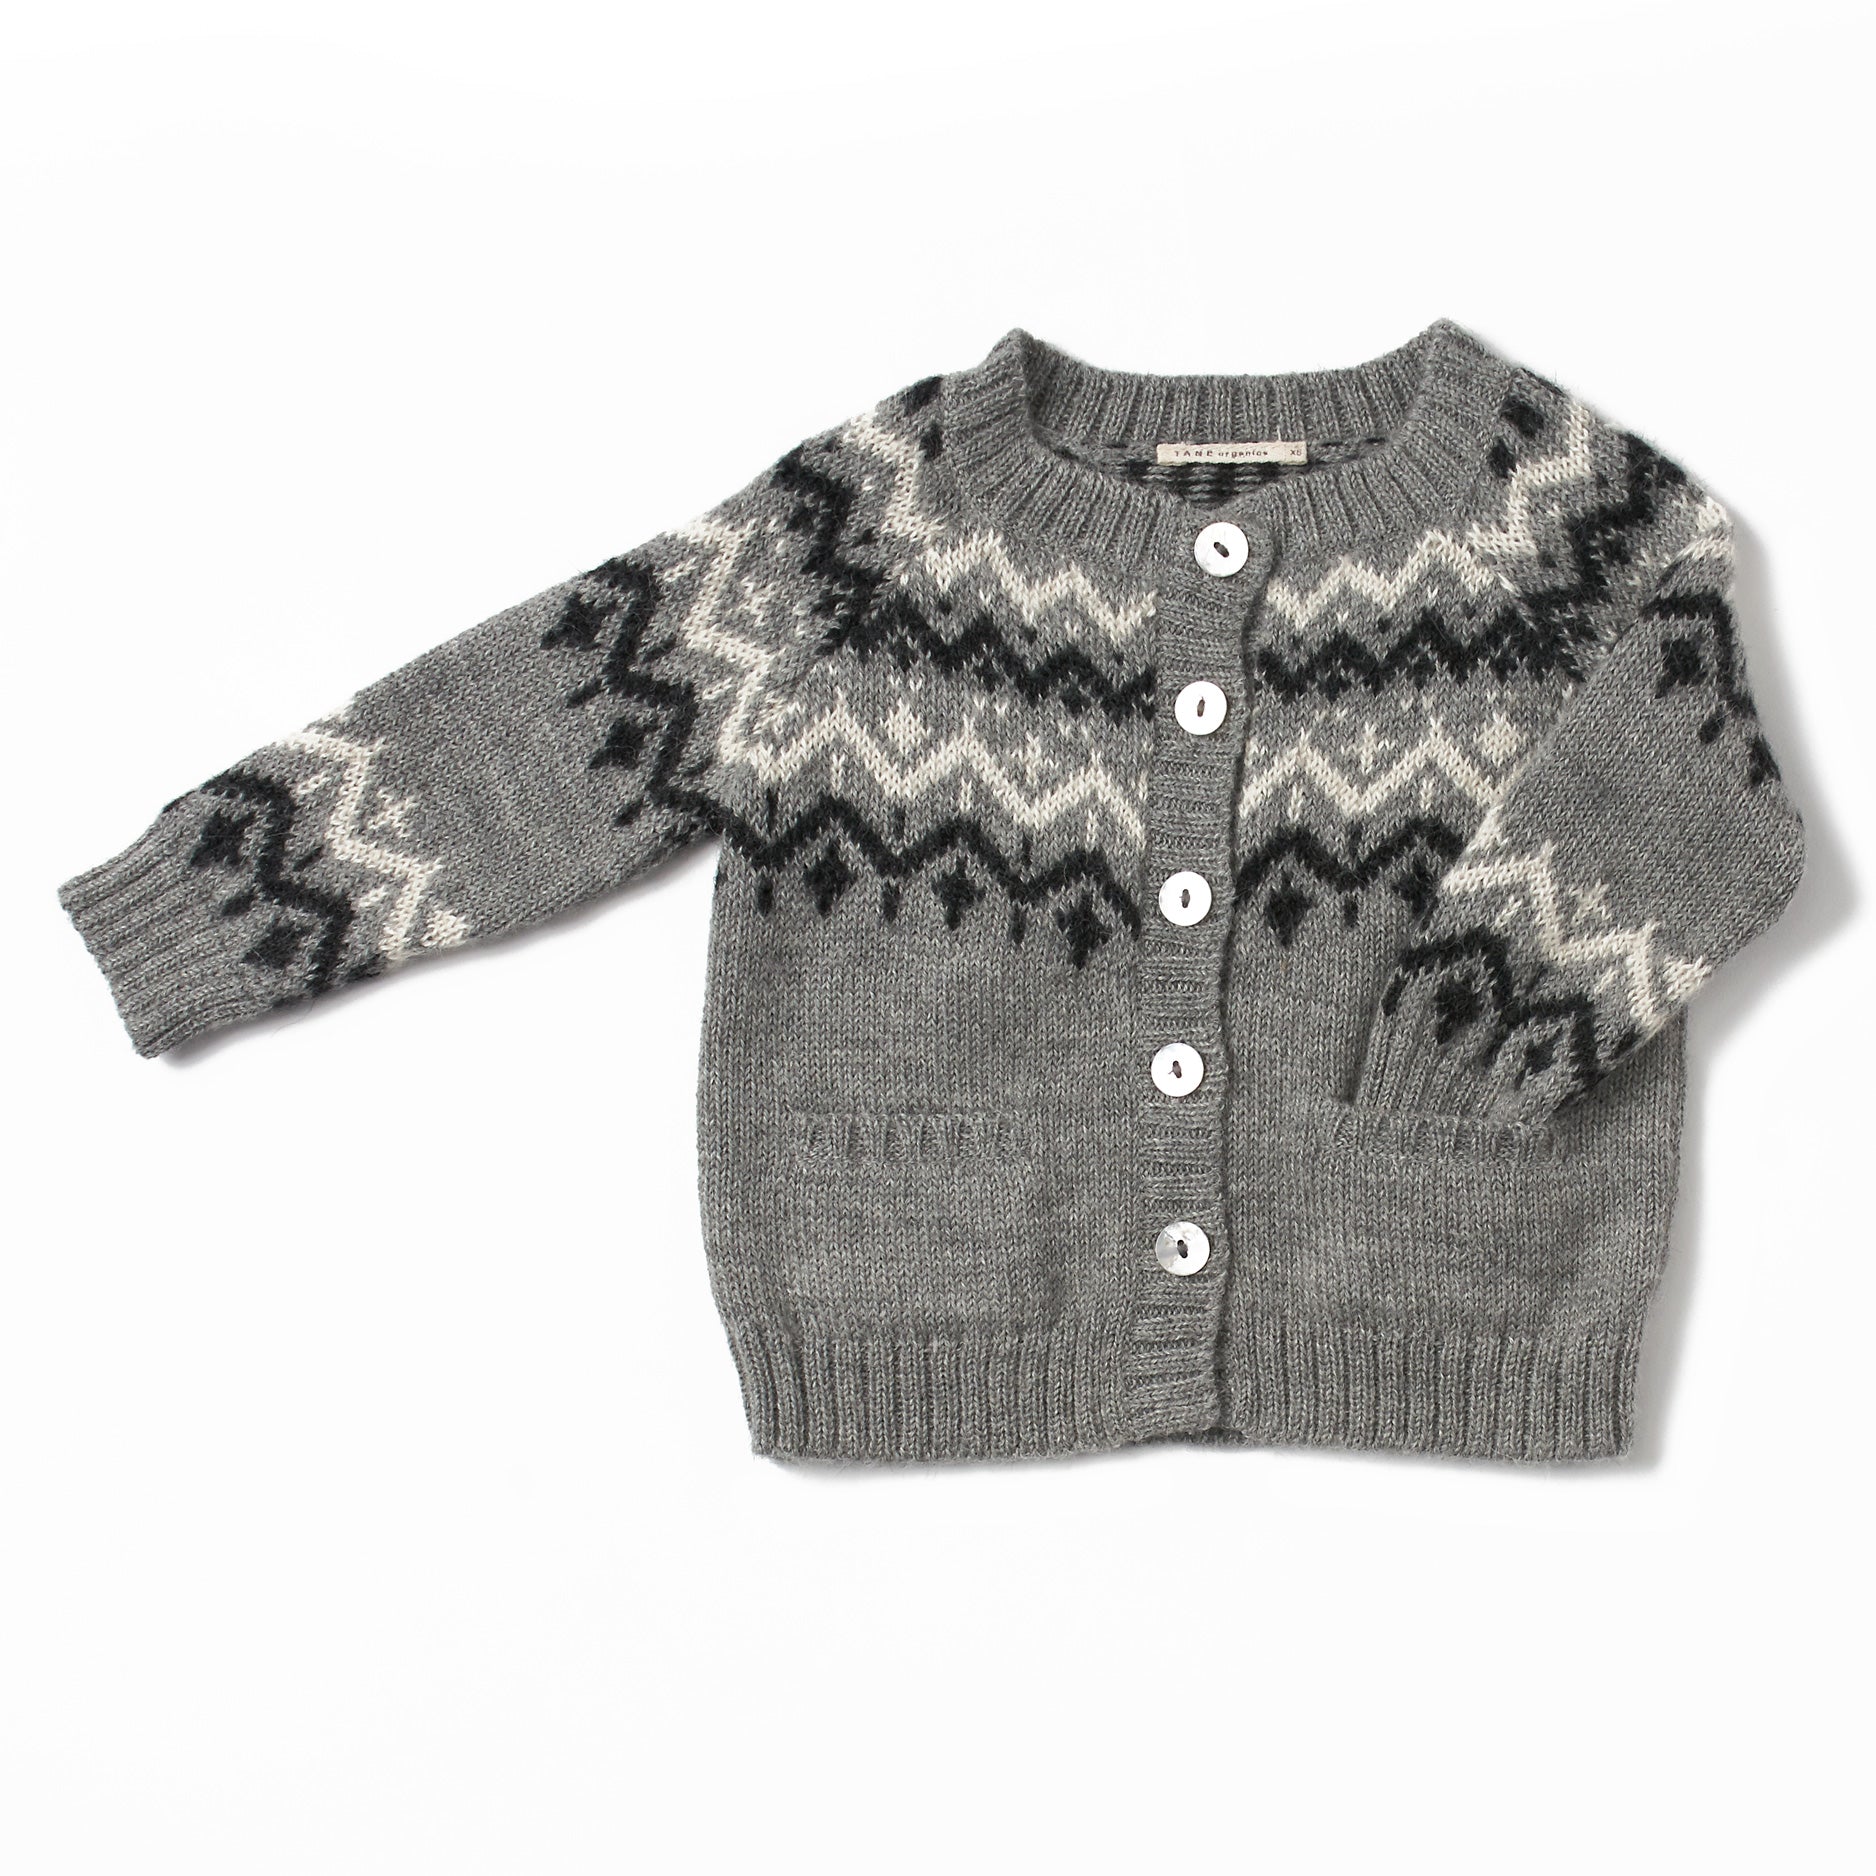 dark grey, crew neck cardigan with a fair isle pattern, has natural shell buttons, handmade with 100% baby alpaca, has two front pockets on the bottom